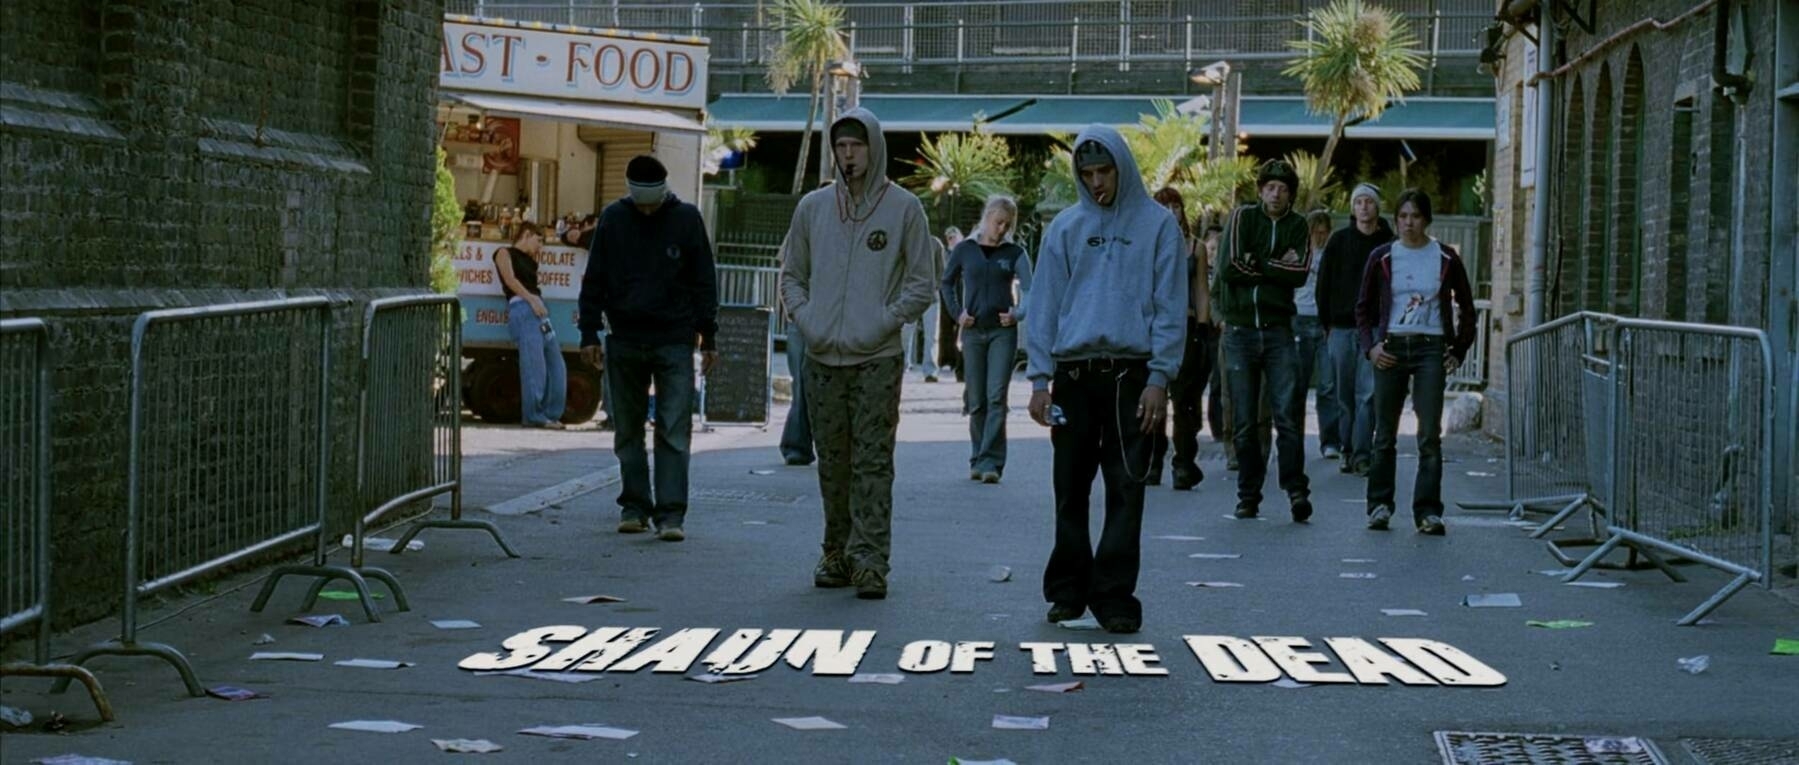 The title card for the film, Shaun of the Dead.